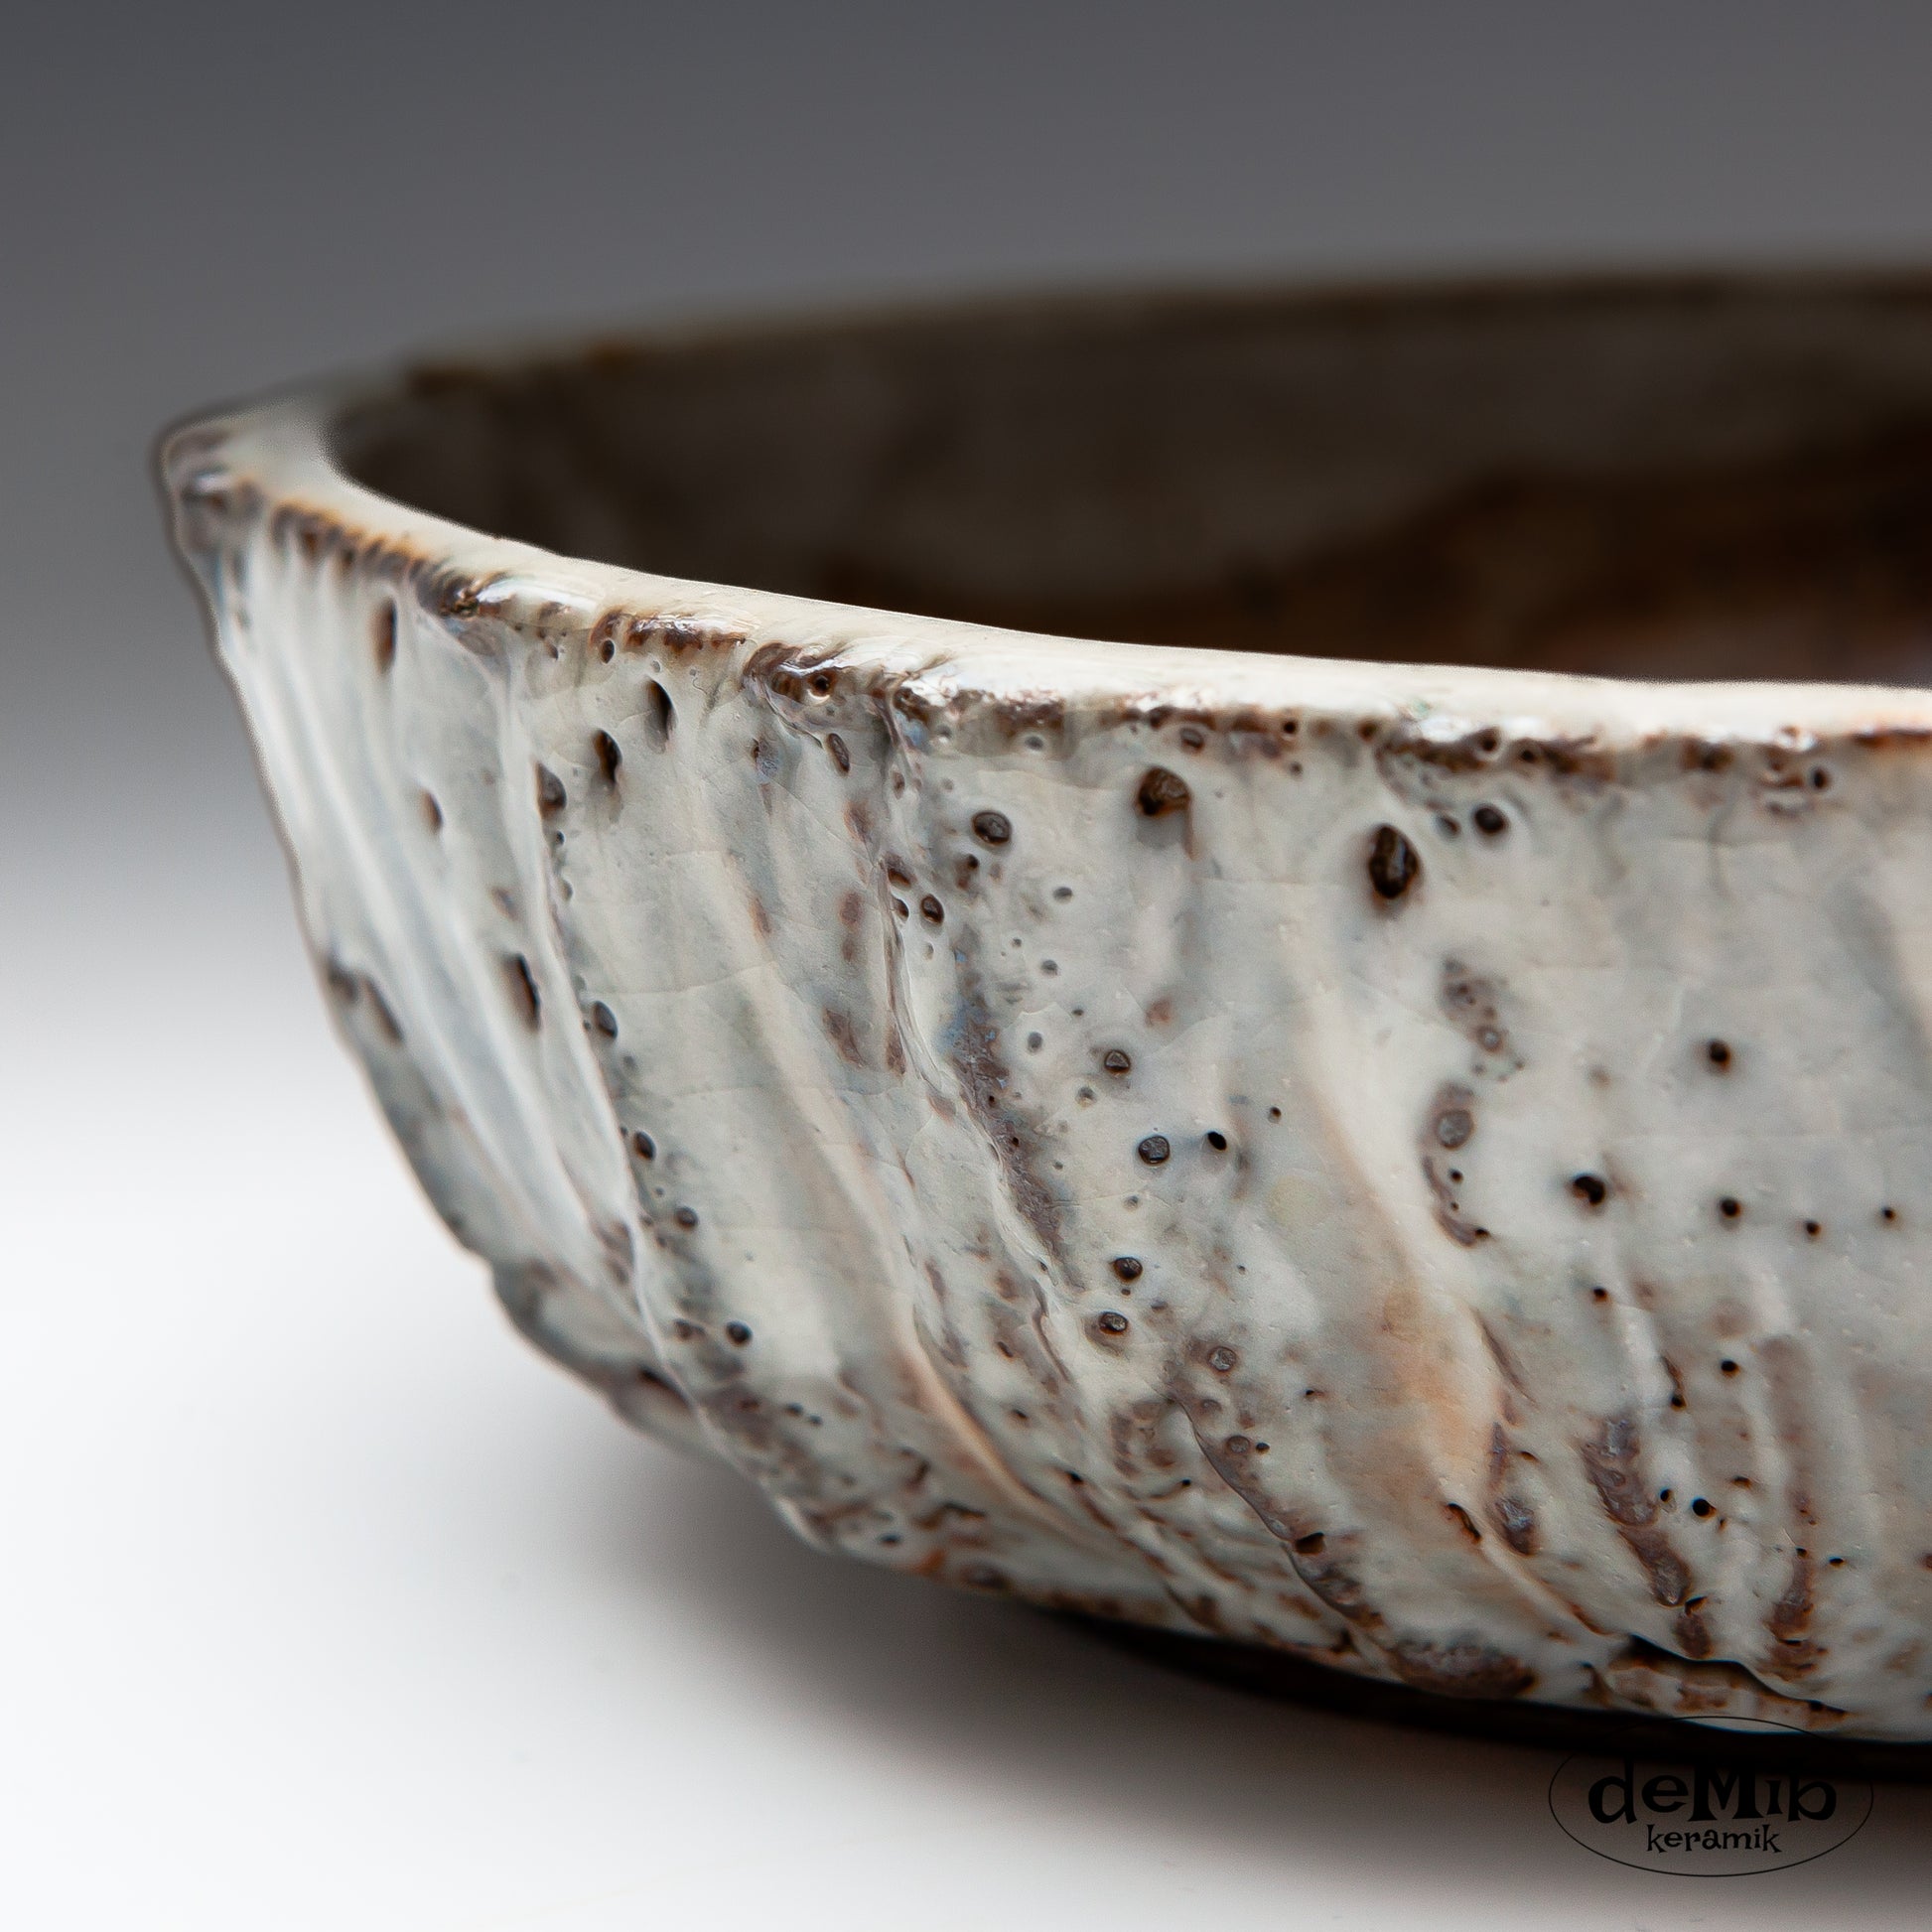 Large Wood Fired Bowl with Strong Textures (22 cm)